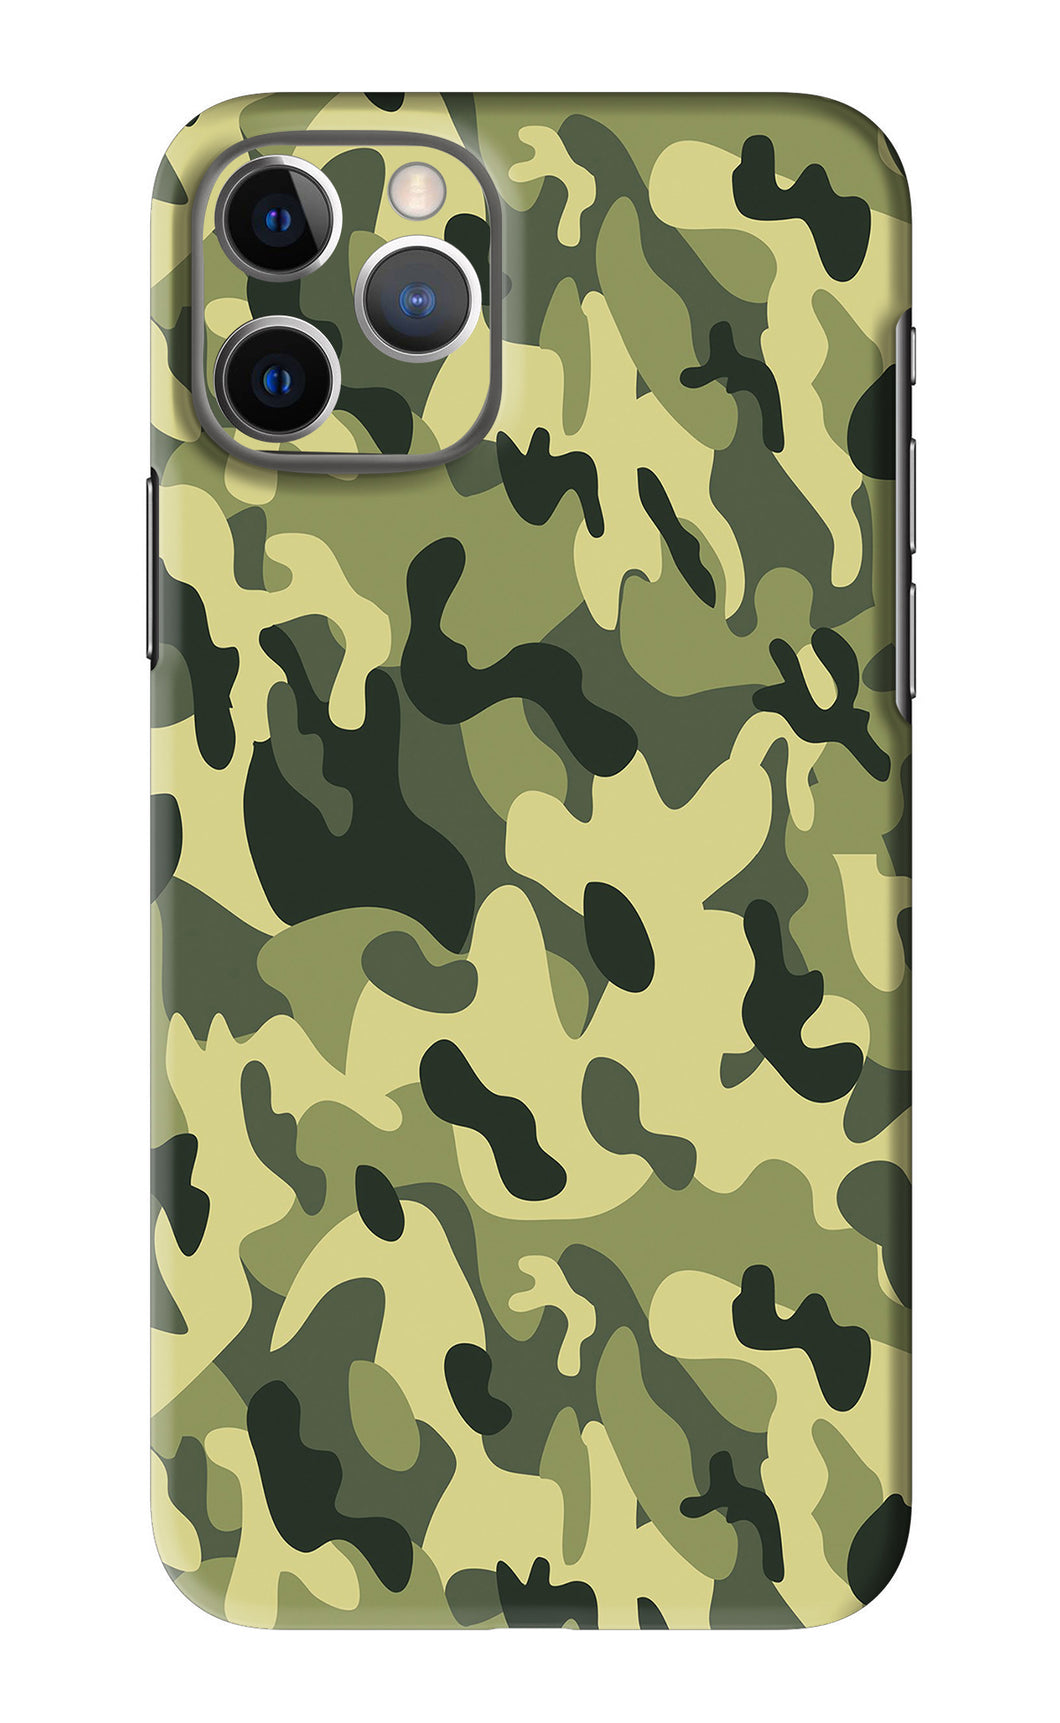 Camouflage iPhone 11 Pro Max Back Skin Wrap